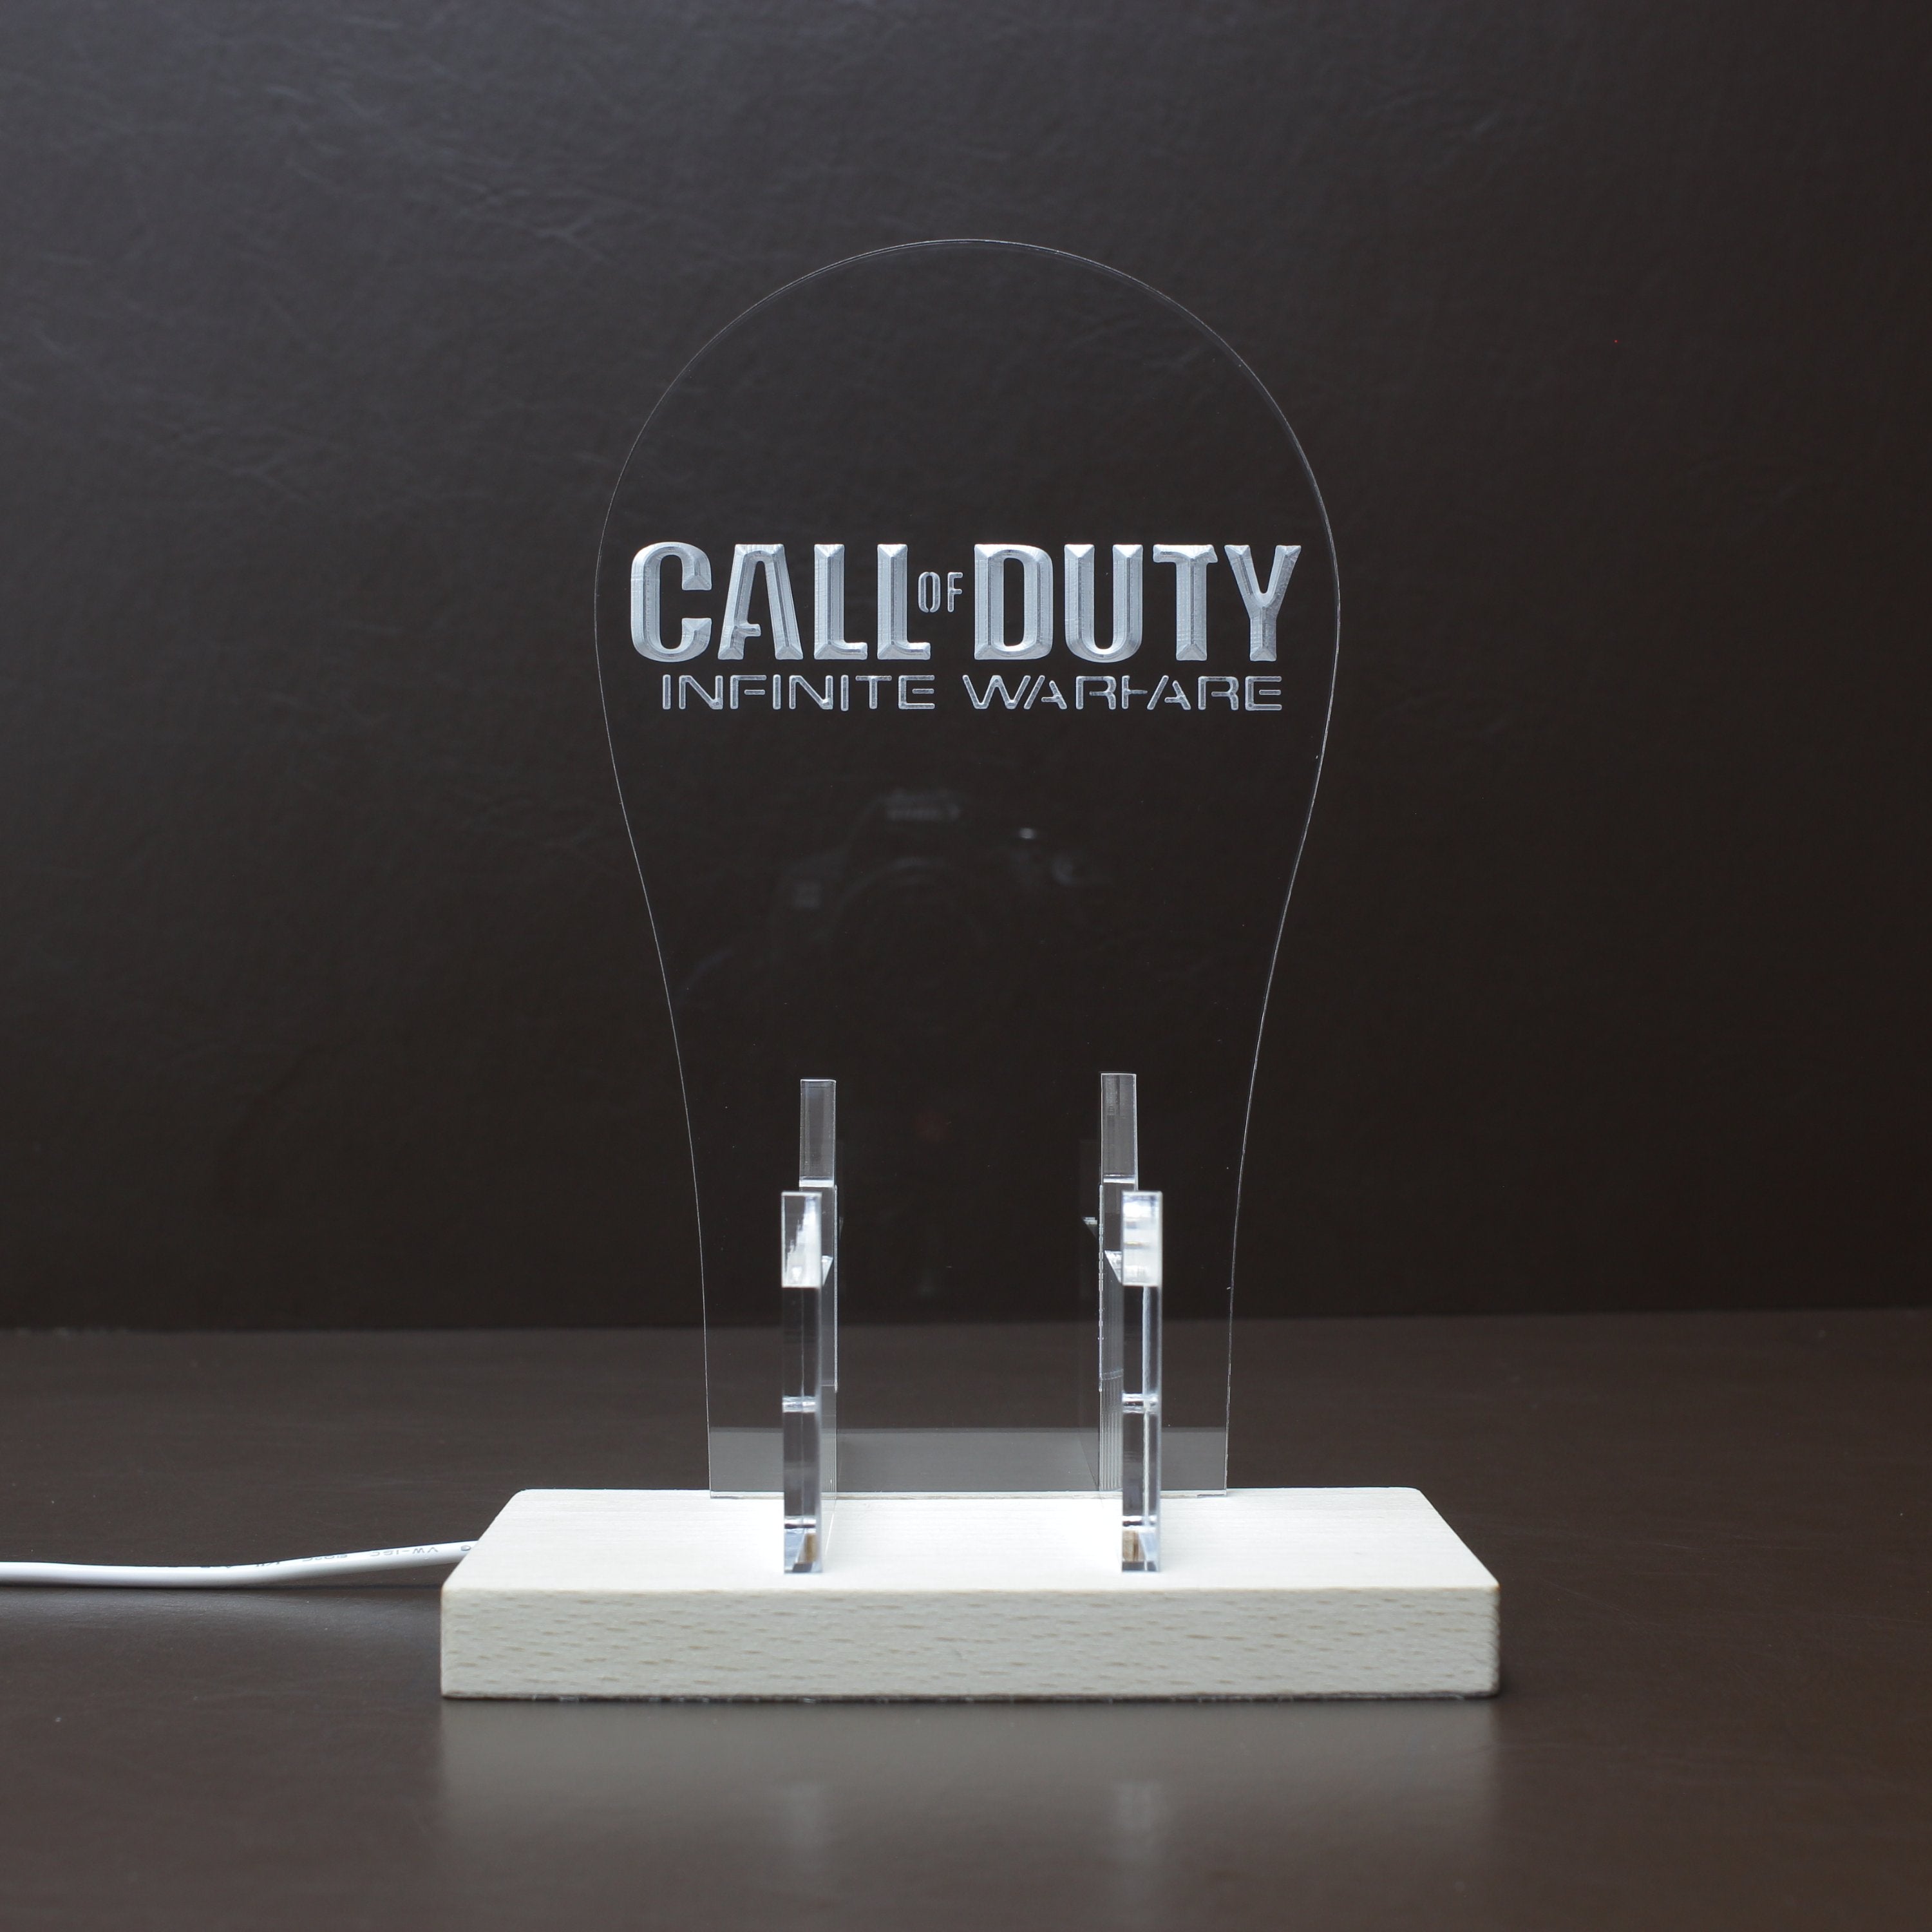 Call of Duty LED Gaming Headset Controller Stand